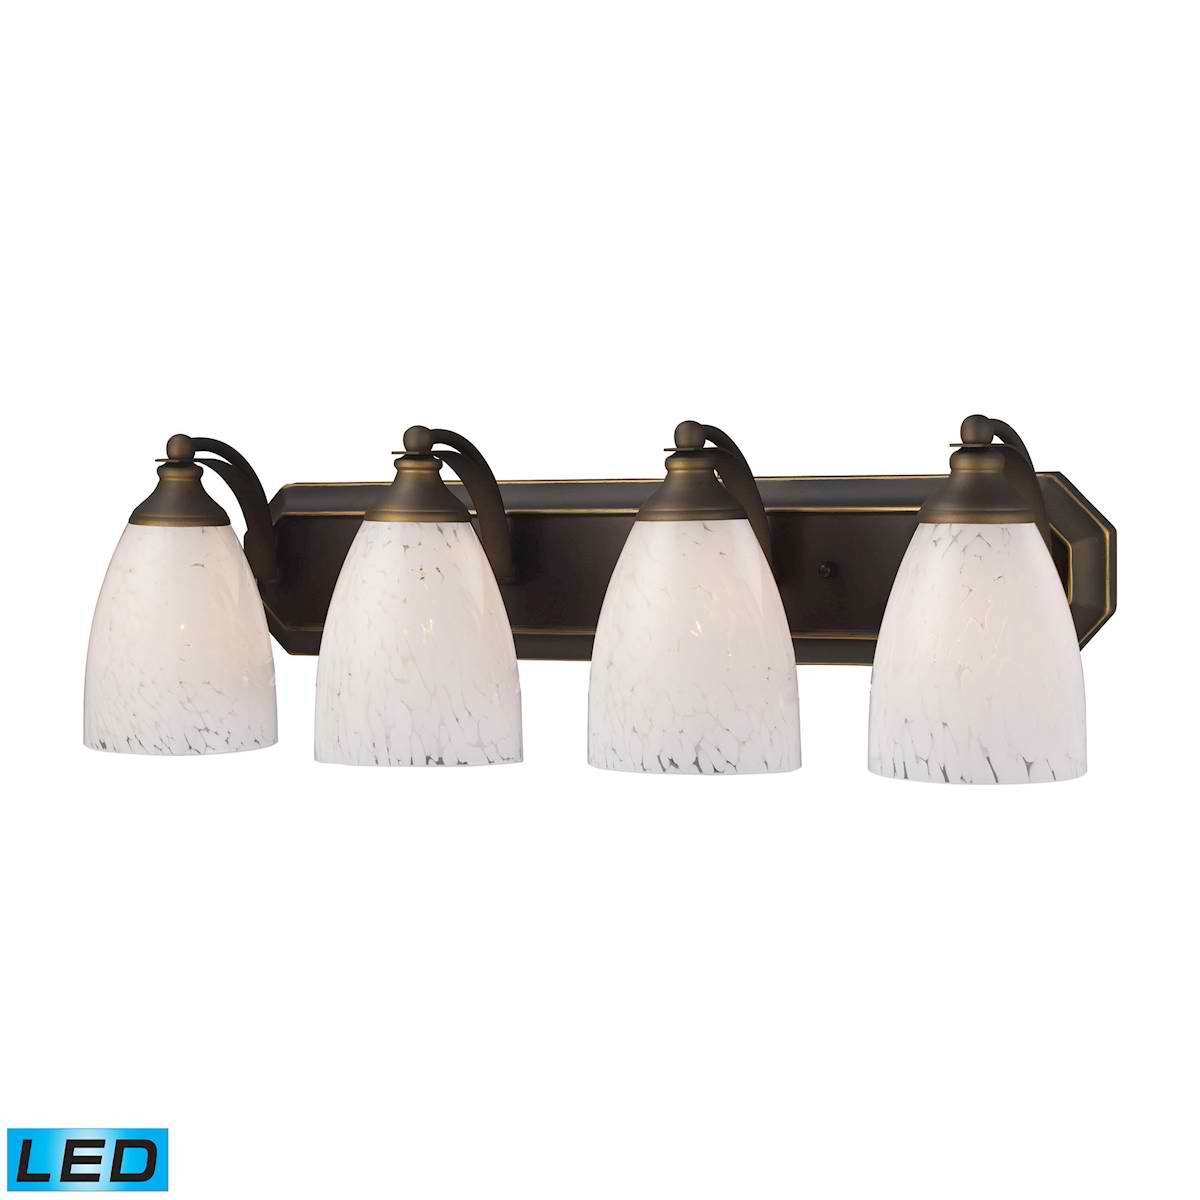 4 Light Vanity in Aged Bronze and Snow White Glass - LED, 800 Lumens (3200 Lumens Total) with Full Scale